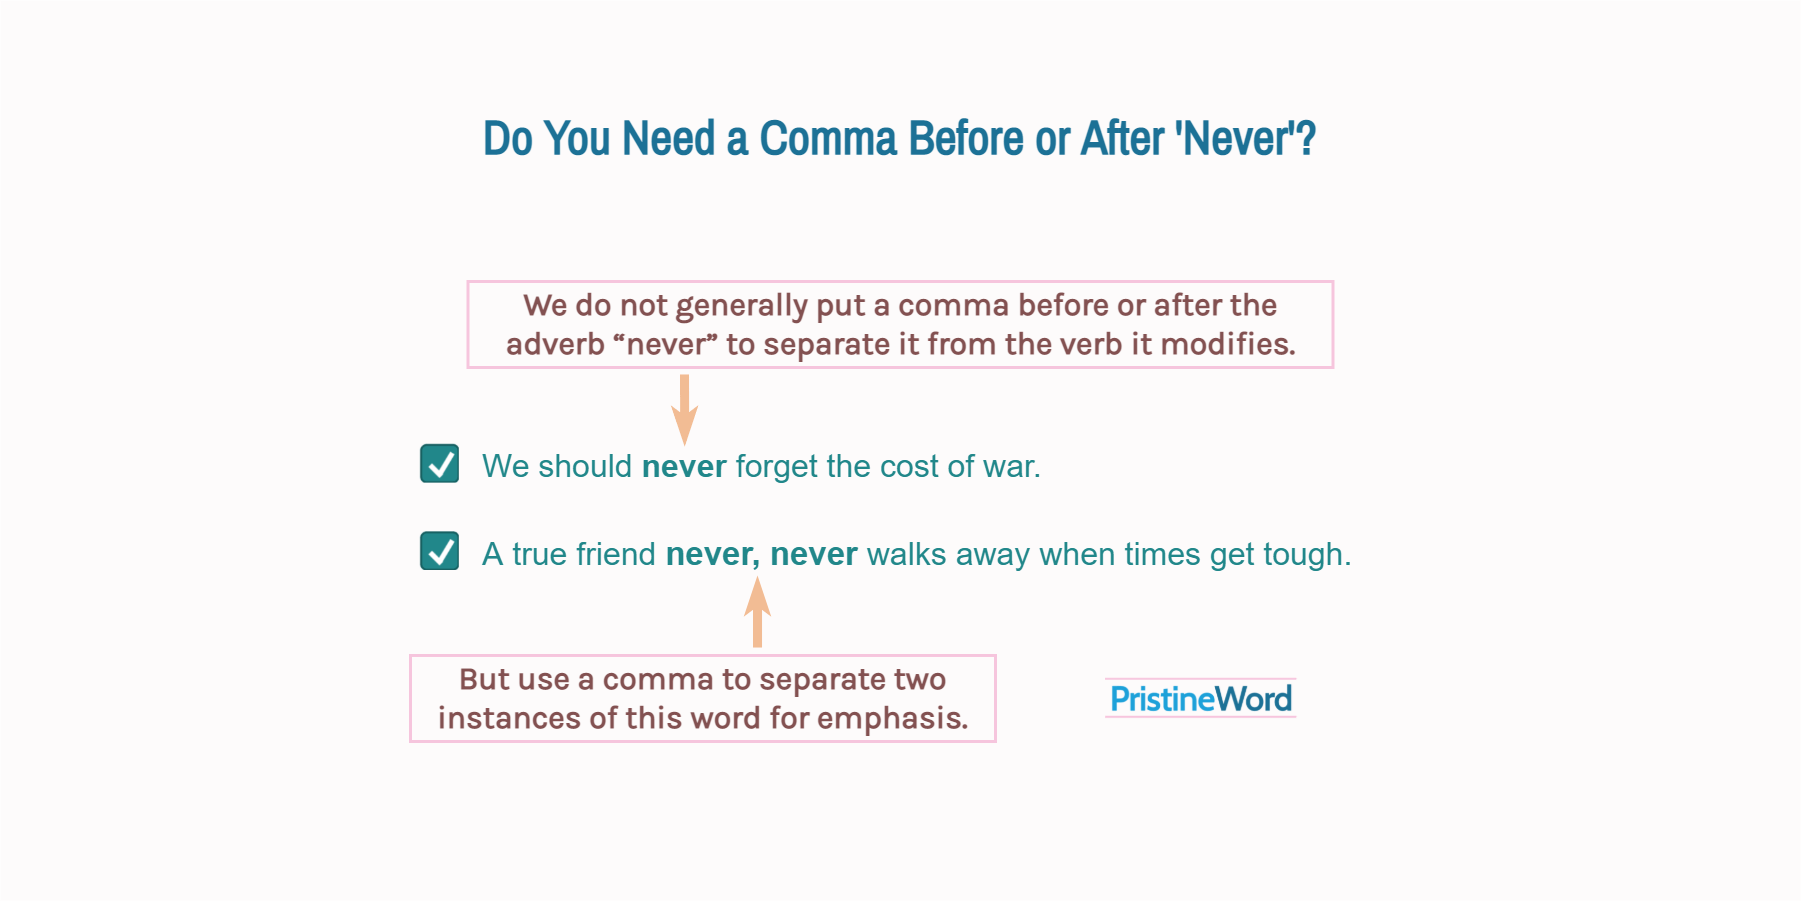 Do You Need a Comma Before or After 'NEVER'?